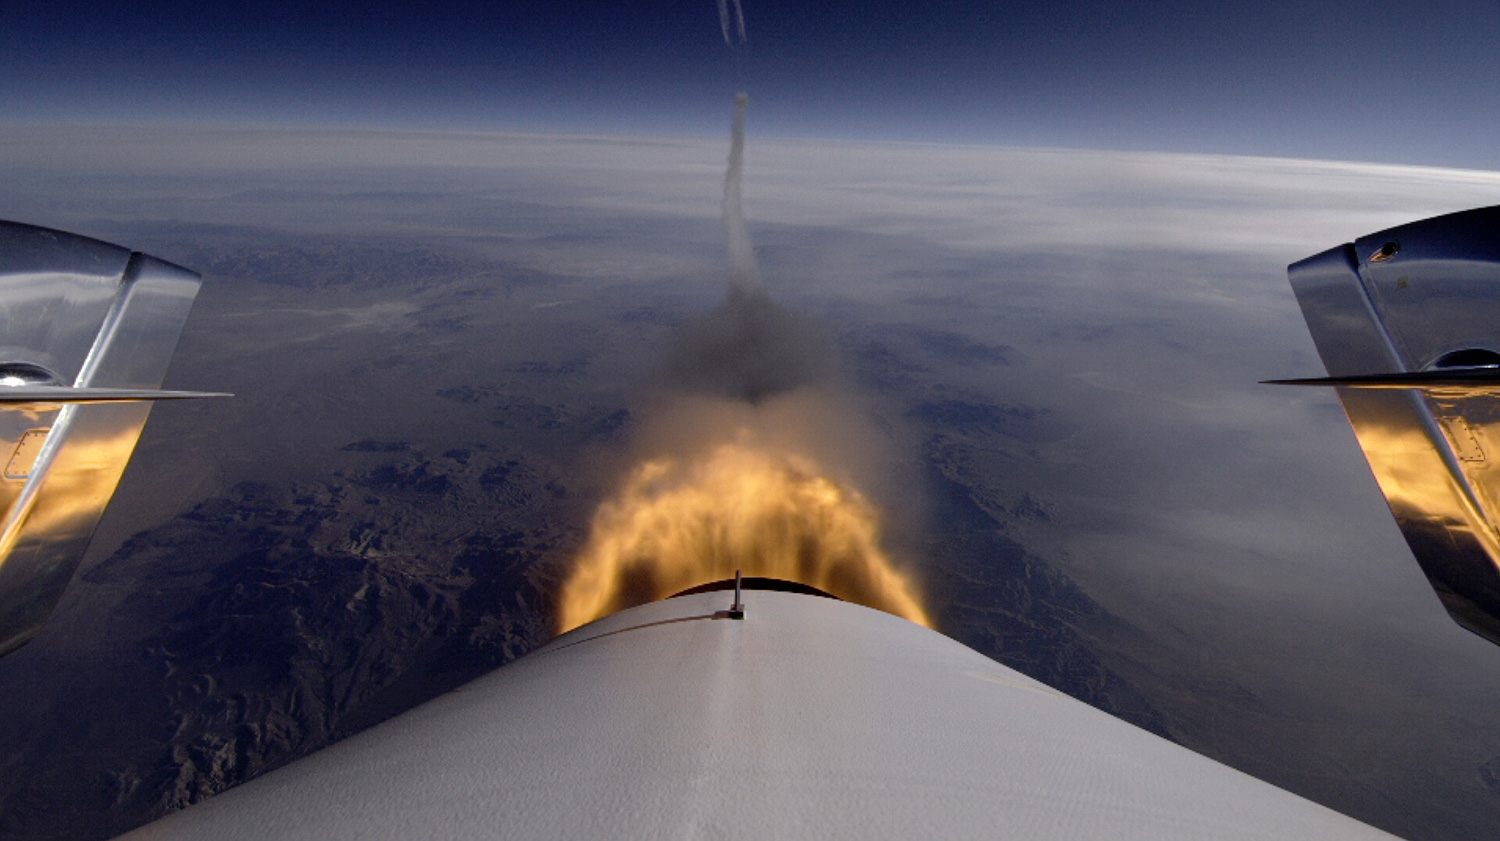 Tail-cam view of the hybrid engine burning during a test flight of SpaceShipTwo which saw the vehicle ascend to 71,000 feet over the Mojave Desert. Credit: Virgin Galactic